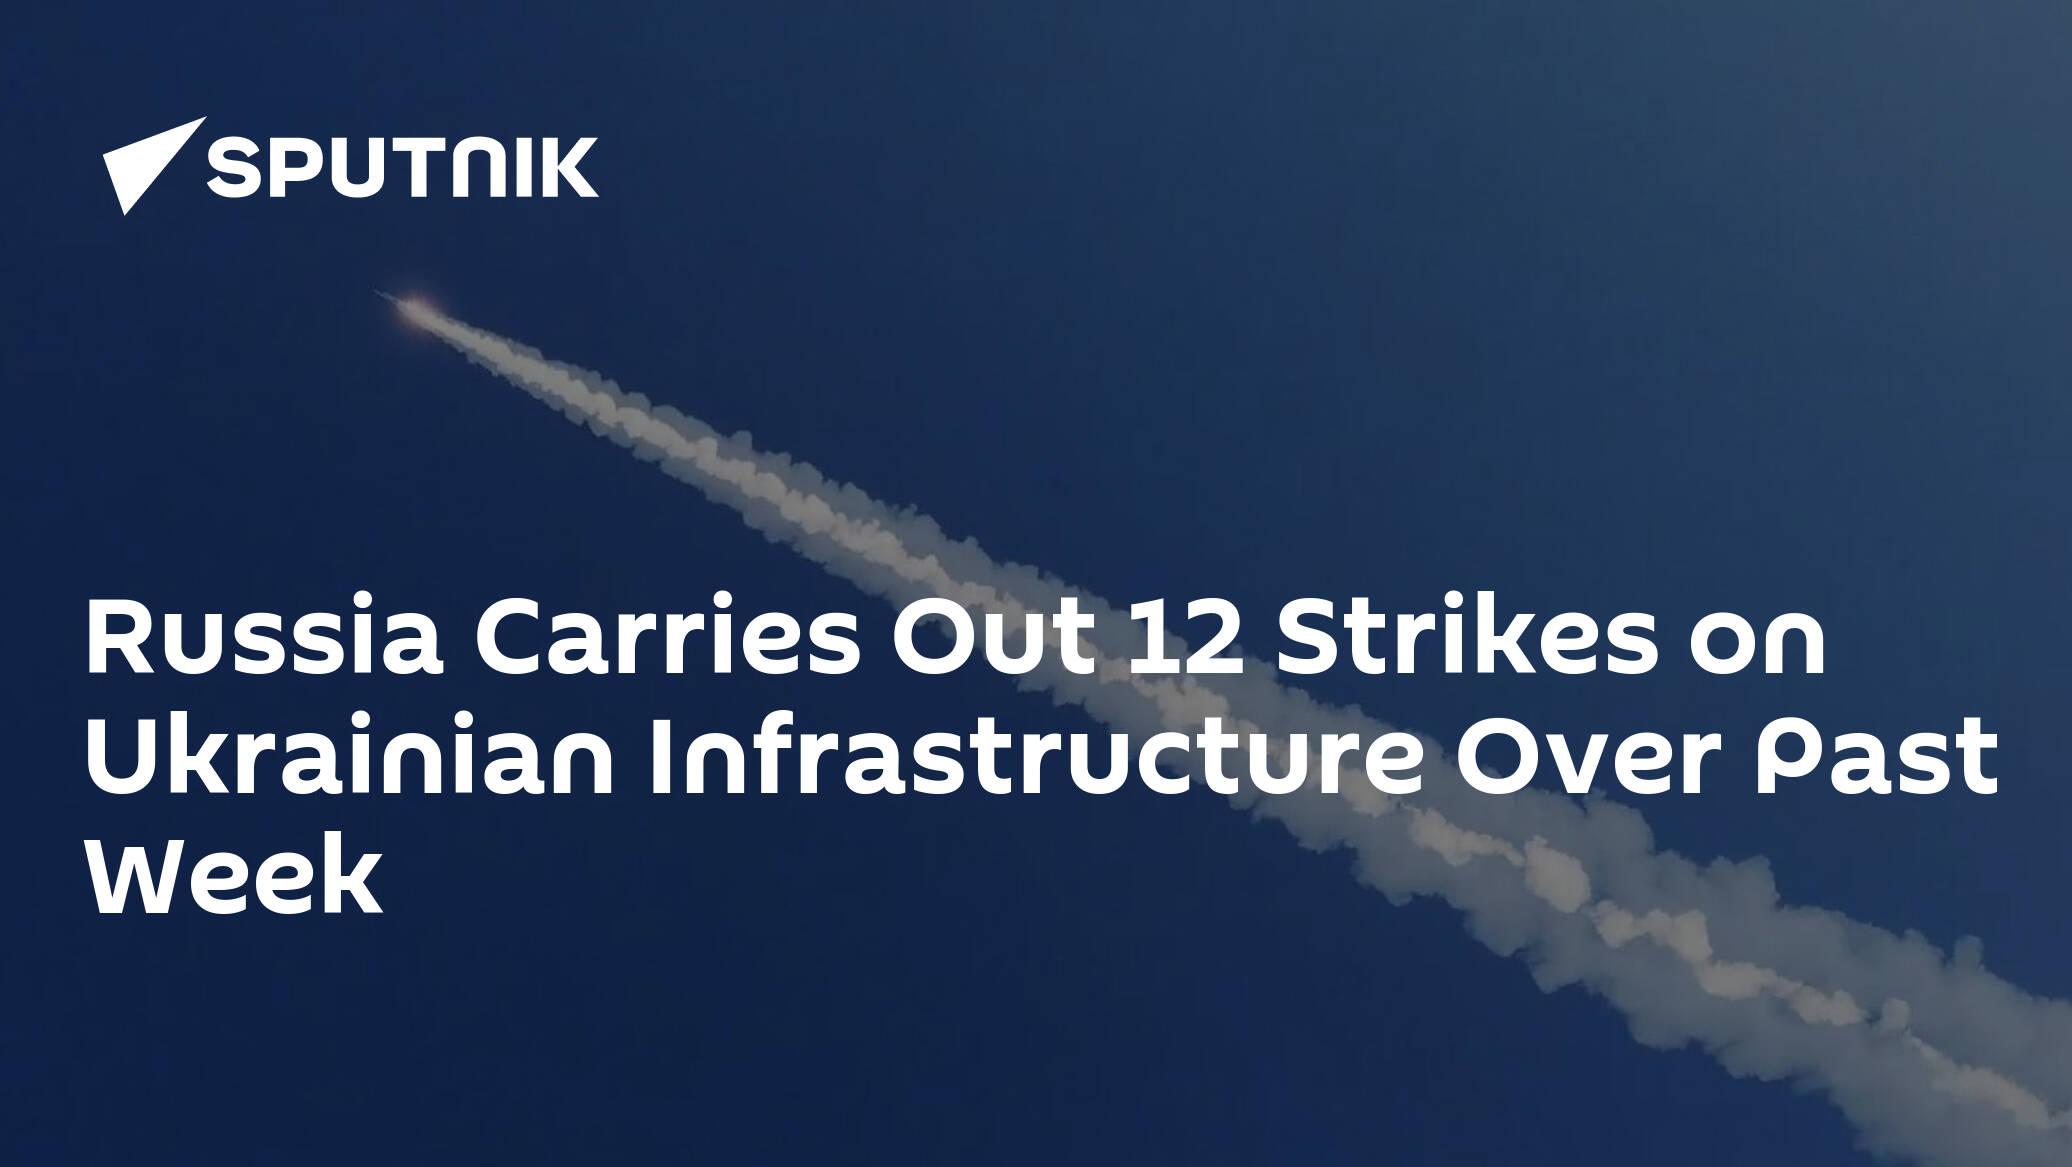 Russia Carried Out 12 Strikes on Ukrainian Infrastructure Over Past Week